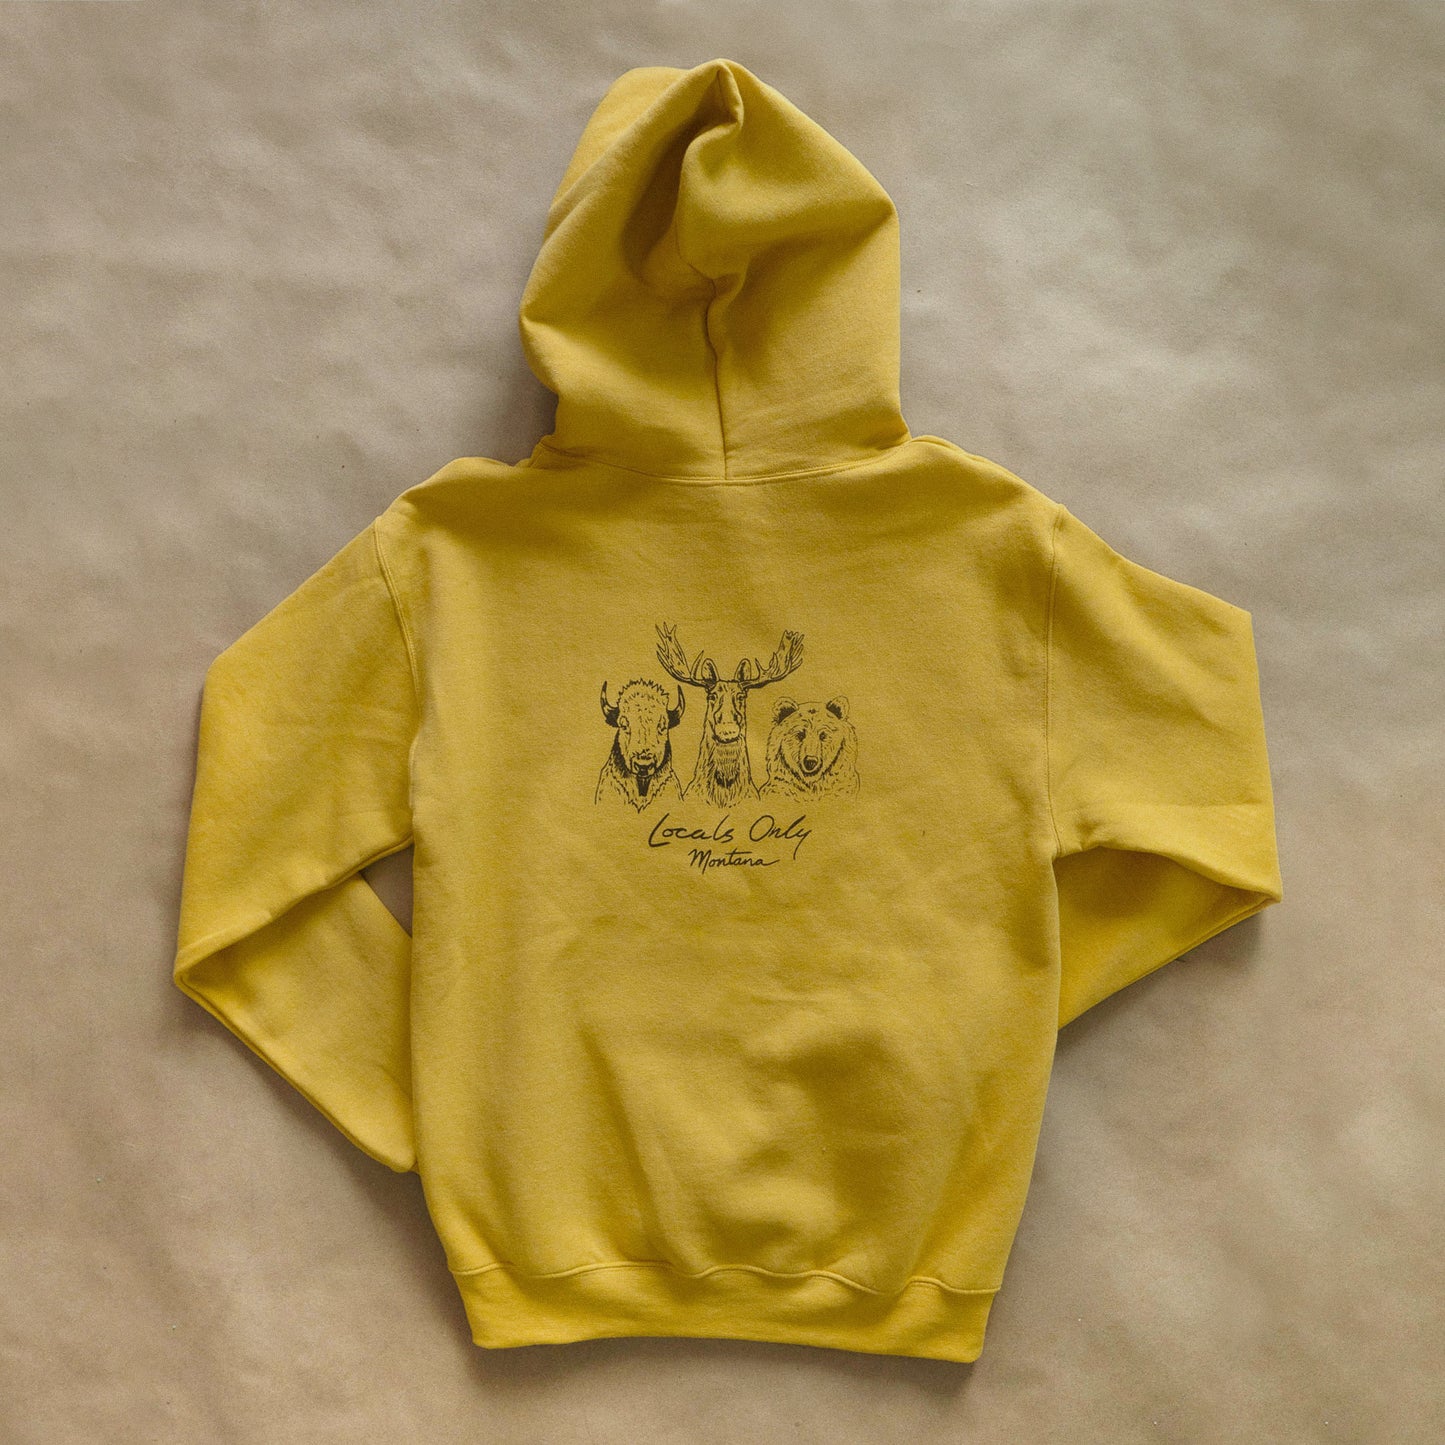 Locals Only Hoodie